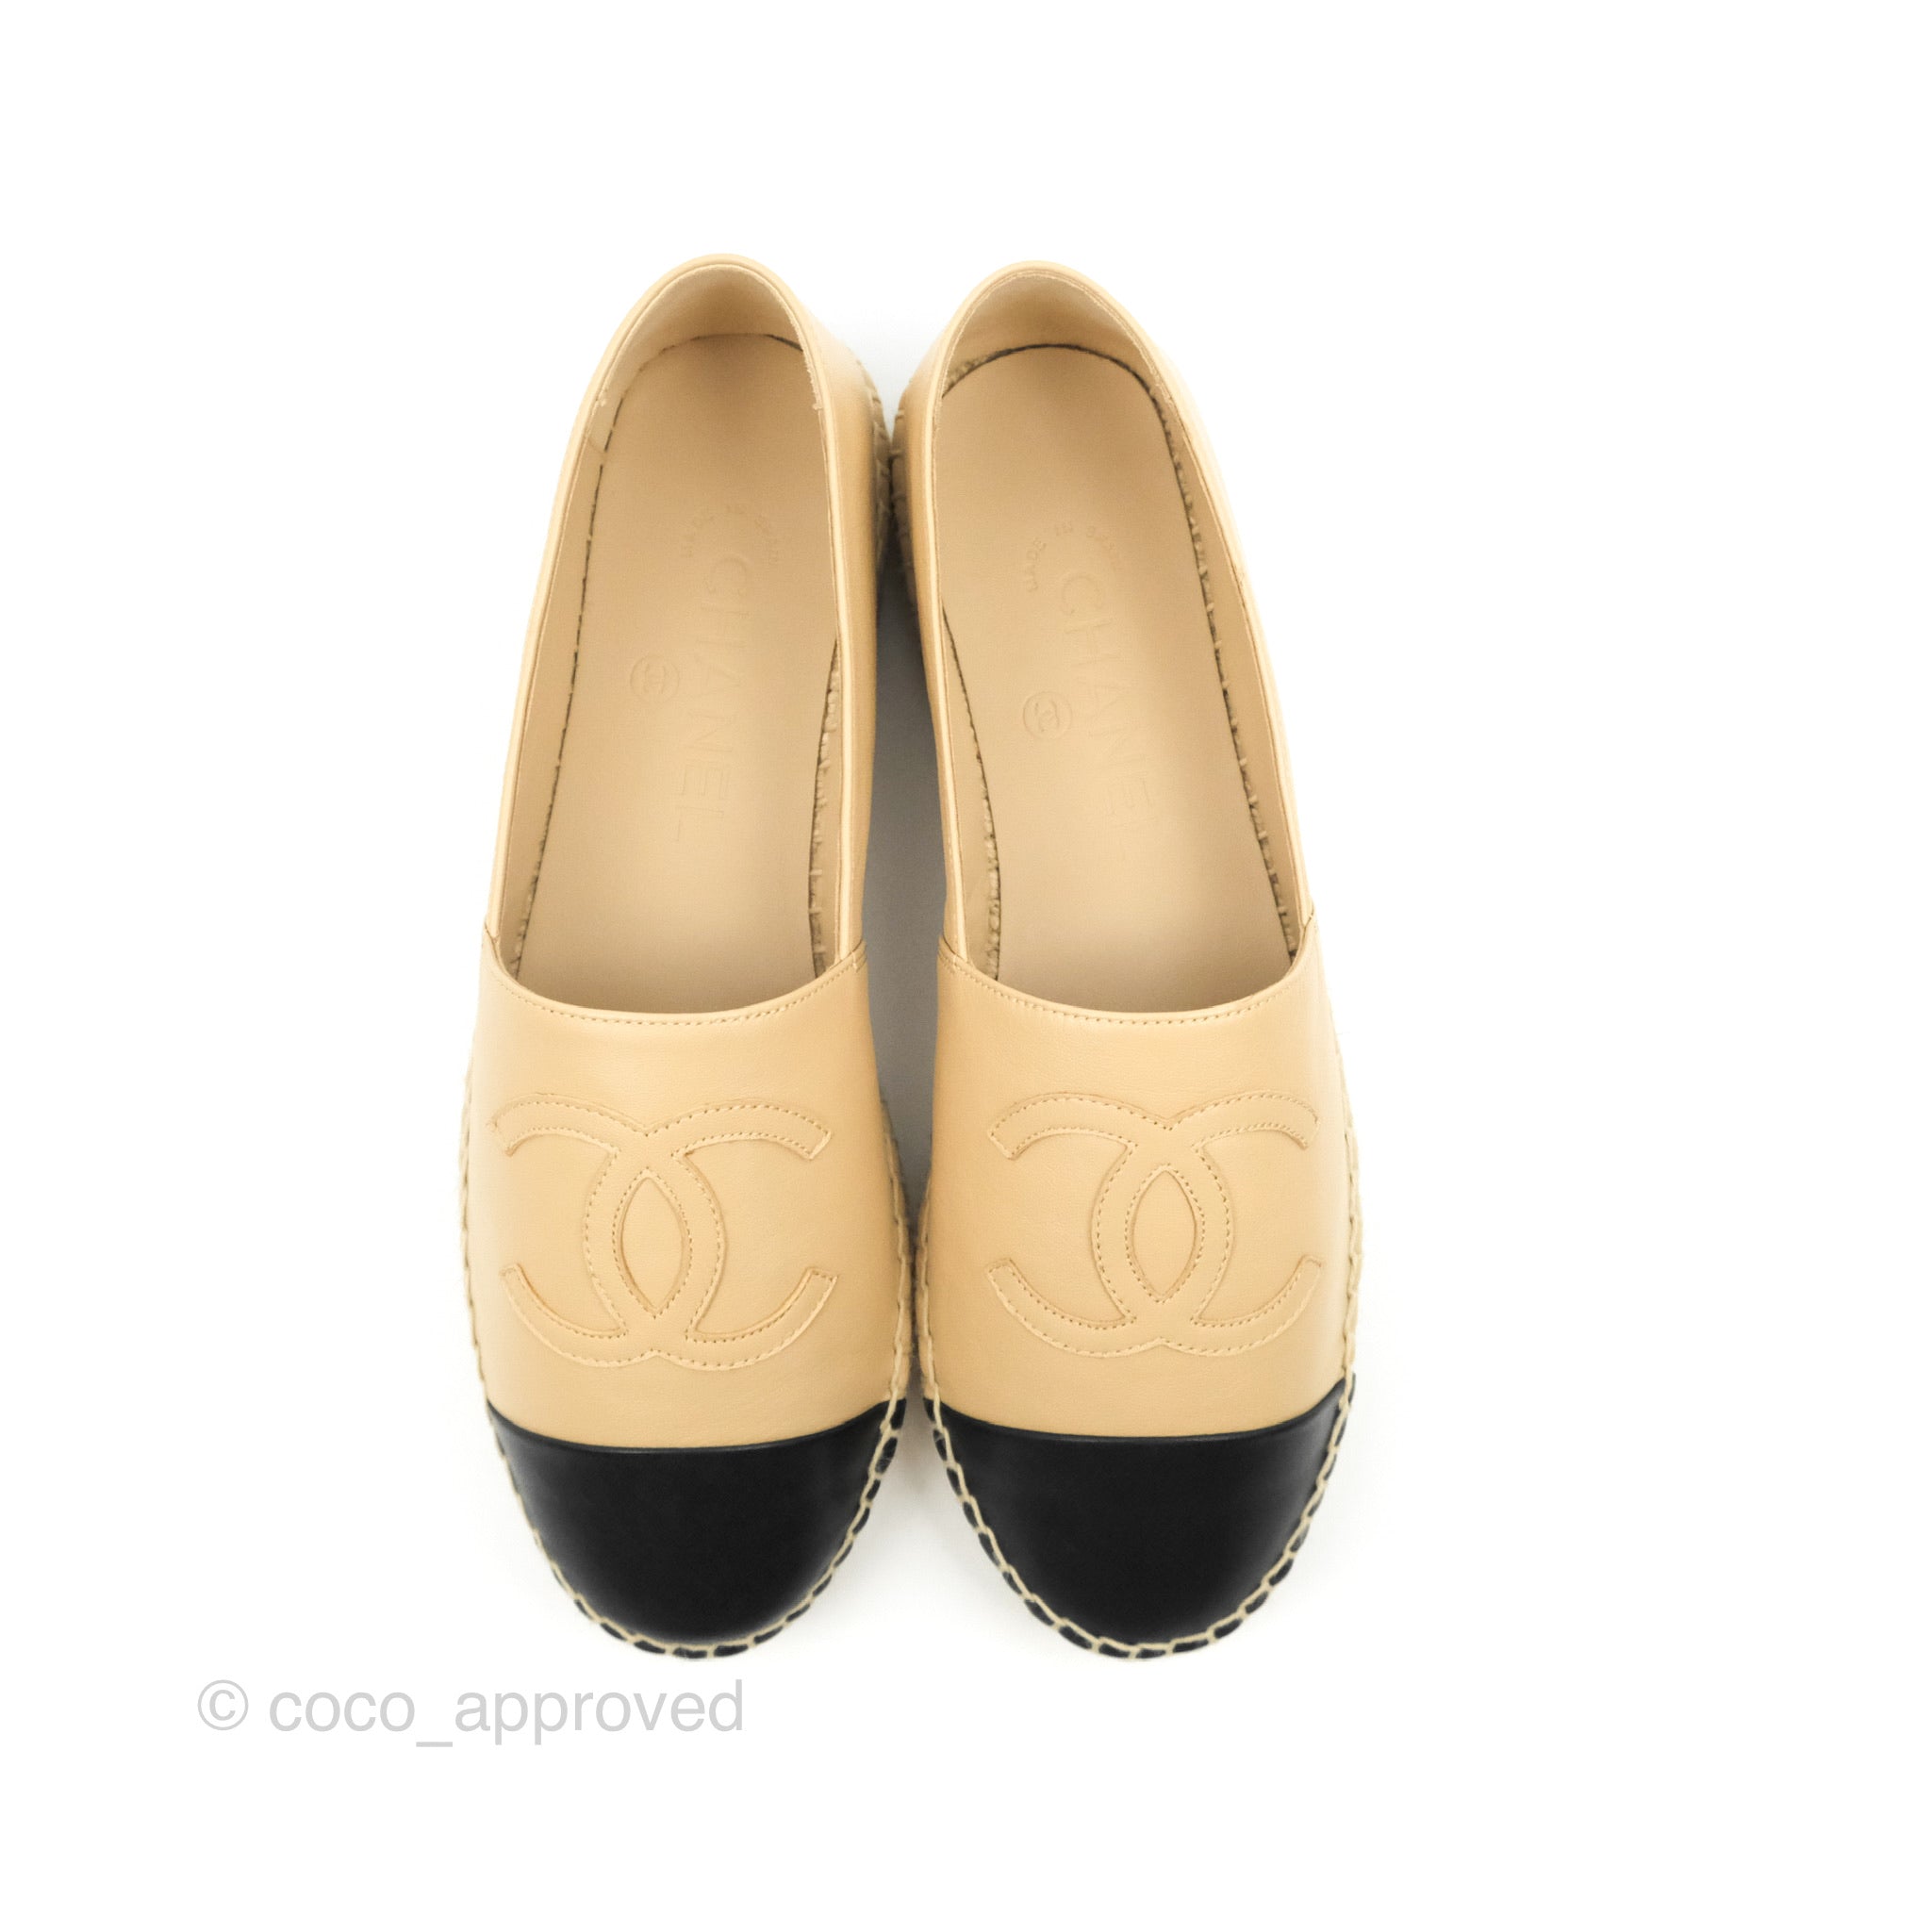 CHANEL Lambskin CC Espadrilles 38 – Fashion Reloved, 55% OFF